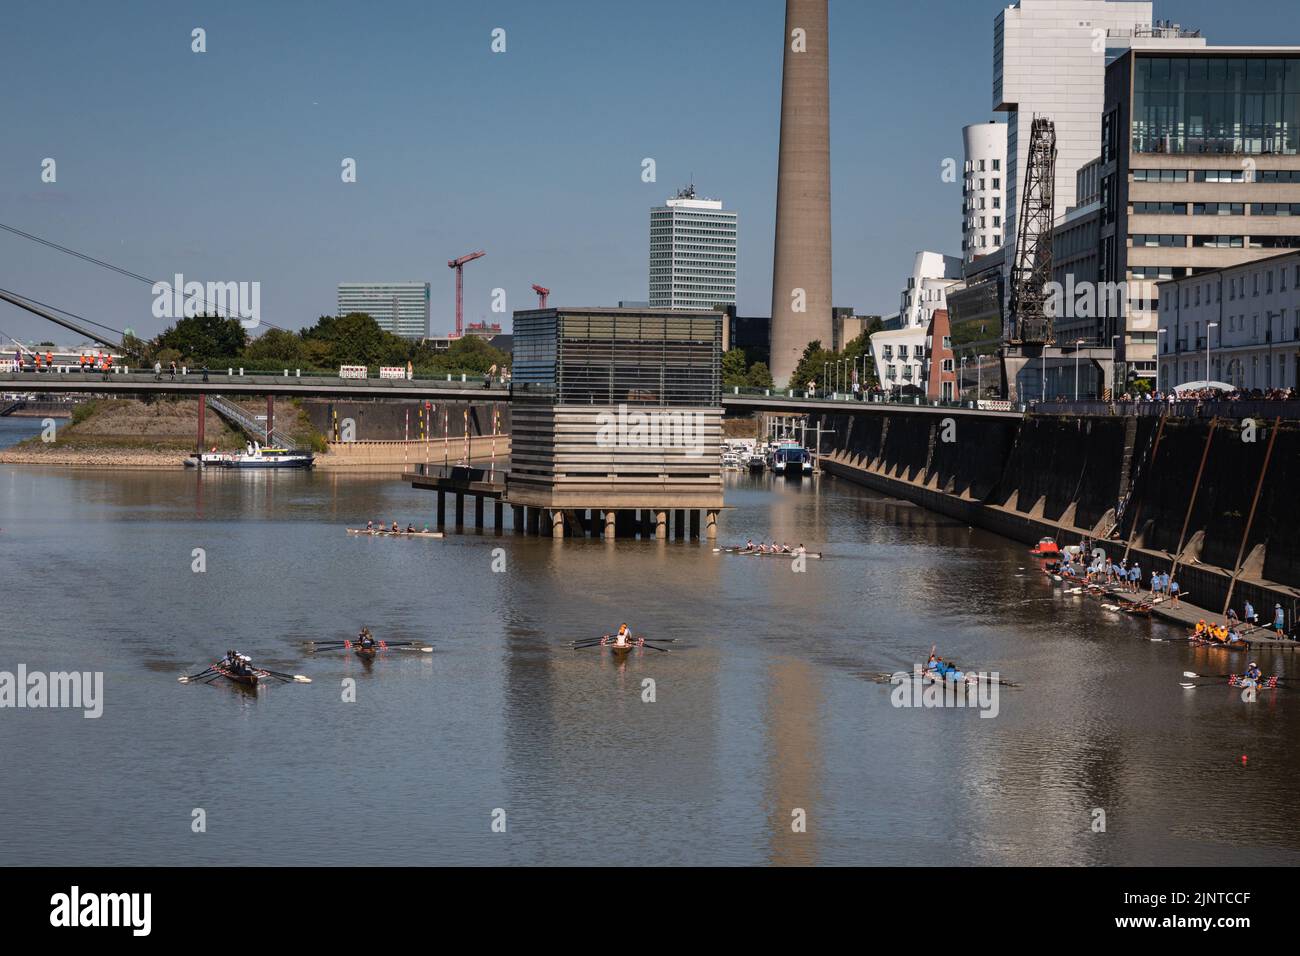 Düsseldorf, NRW, Germany, 13th Aug 2022. A charity rowing race for people with cancer seems to encounter fewer problems in the media harbour area of the city, but even here water levels are much lower. The River Rhine, one of the busiest inland waterways in the world, has been strongly affected by the ongoing drought and resulting low water levels, caused by prolonged heat of up to 40 degrees and very little rain in the last few weeks. The shipping lane has narrowed down considerably, slowing down traffic, most vessels have also had to considerably reduce their freight weight, leading to suppl Stock Photo